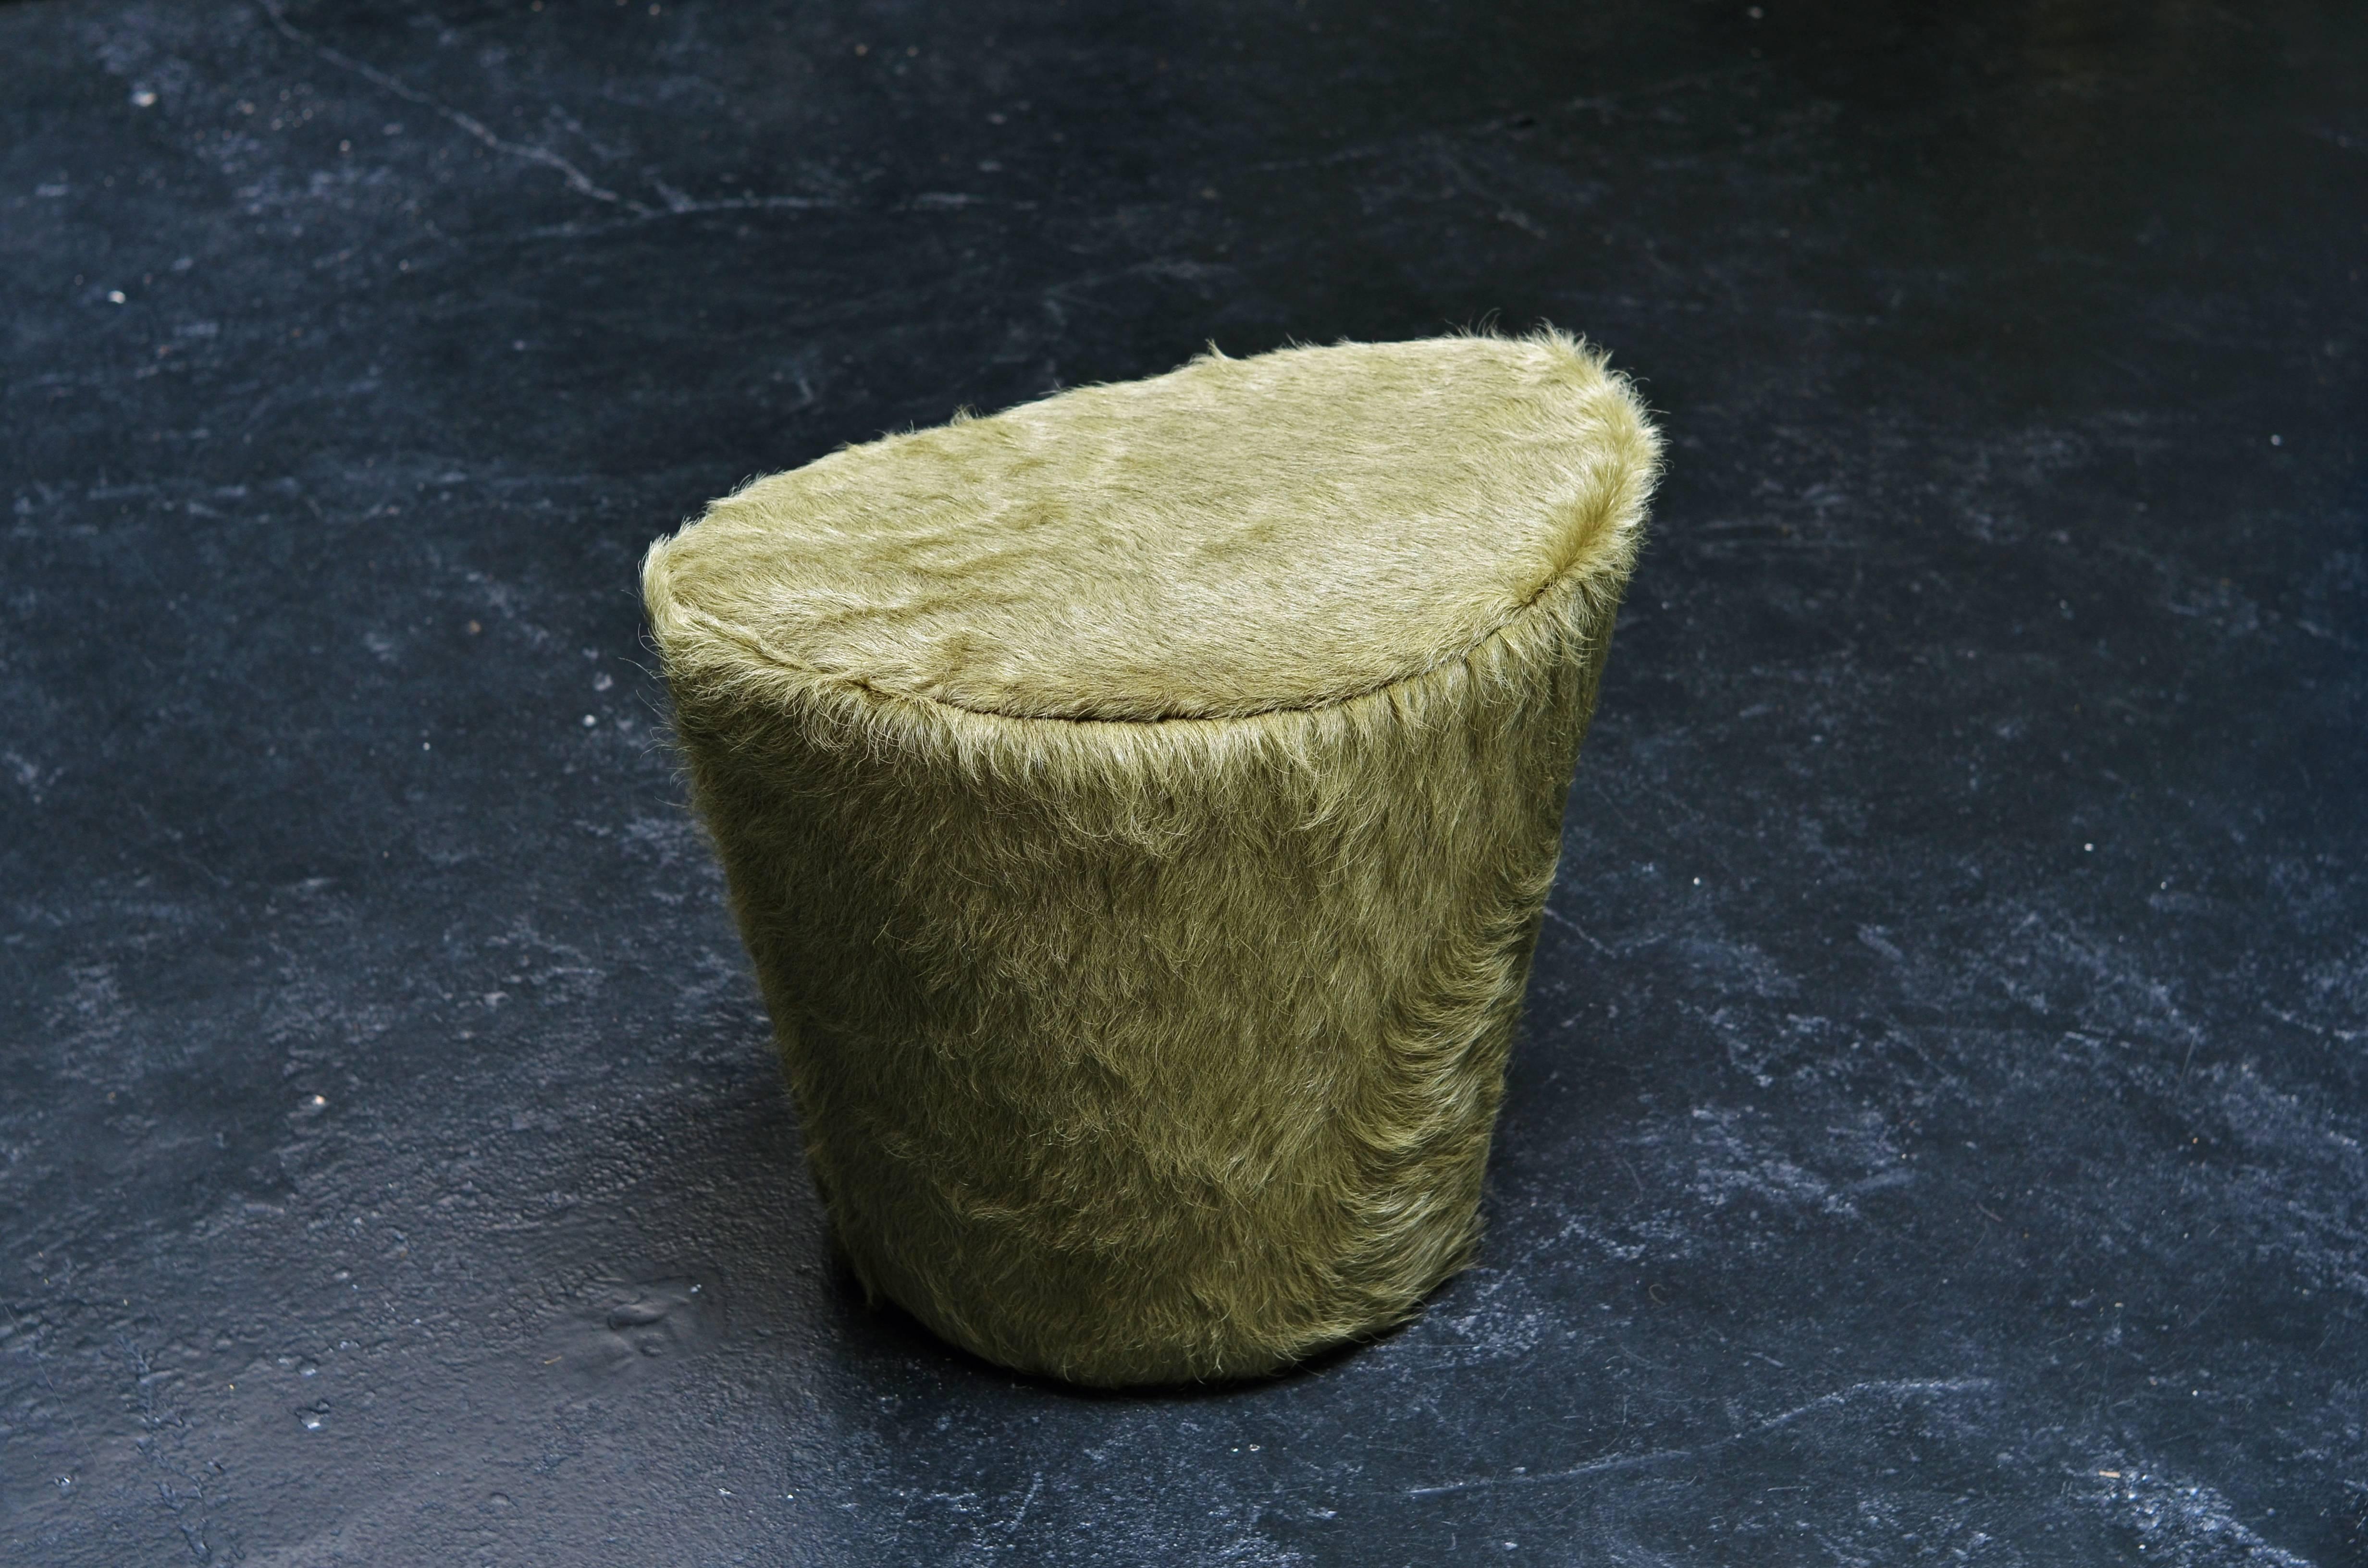 The Ikaros stool is part of a three-type upholstered cowhide series: polygonally shaped poufs (large and small), a curvilinear stool, and oval bench; each one encased in a distinctive cowhide cover. Created to either place in front of a couch in the